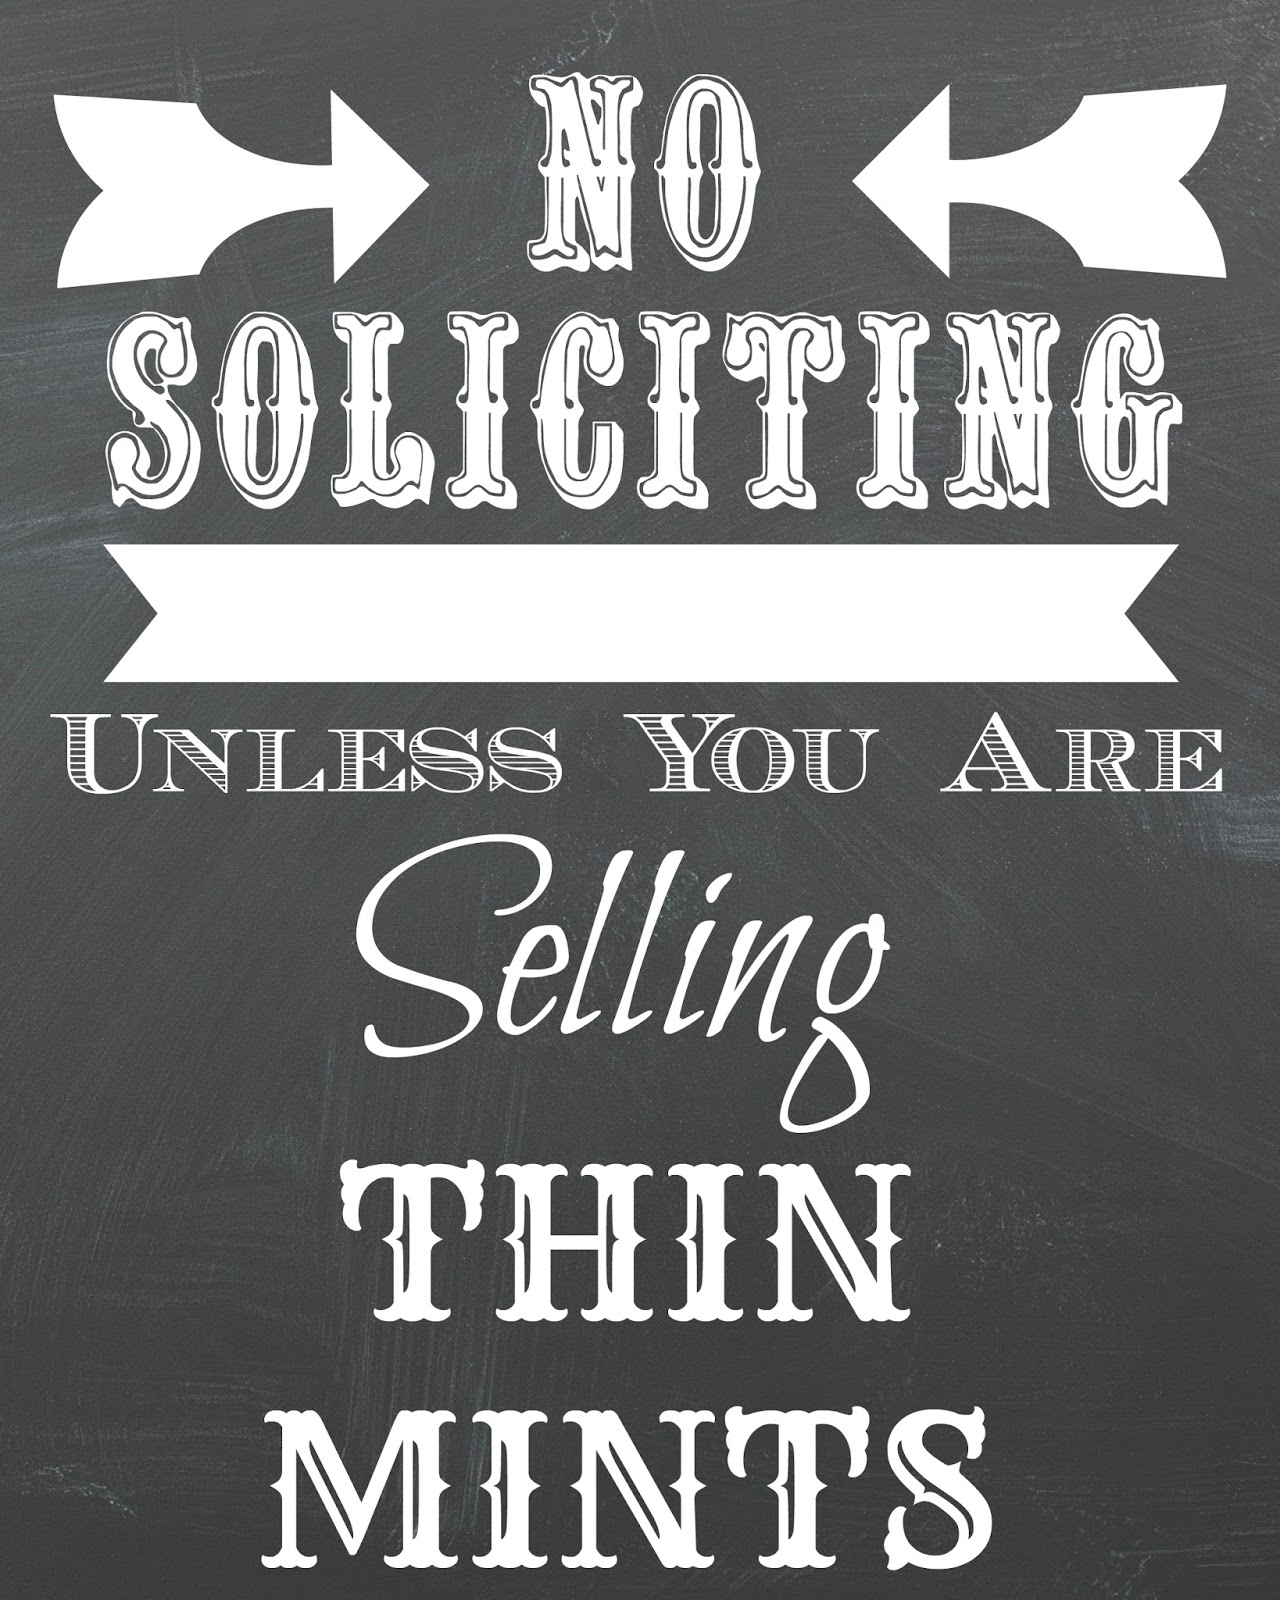 dorothy-sue-and-millie-b-s-too-free-no-soliciting-chalkboard-printable